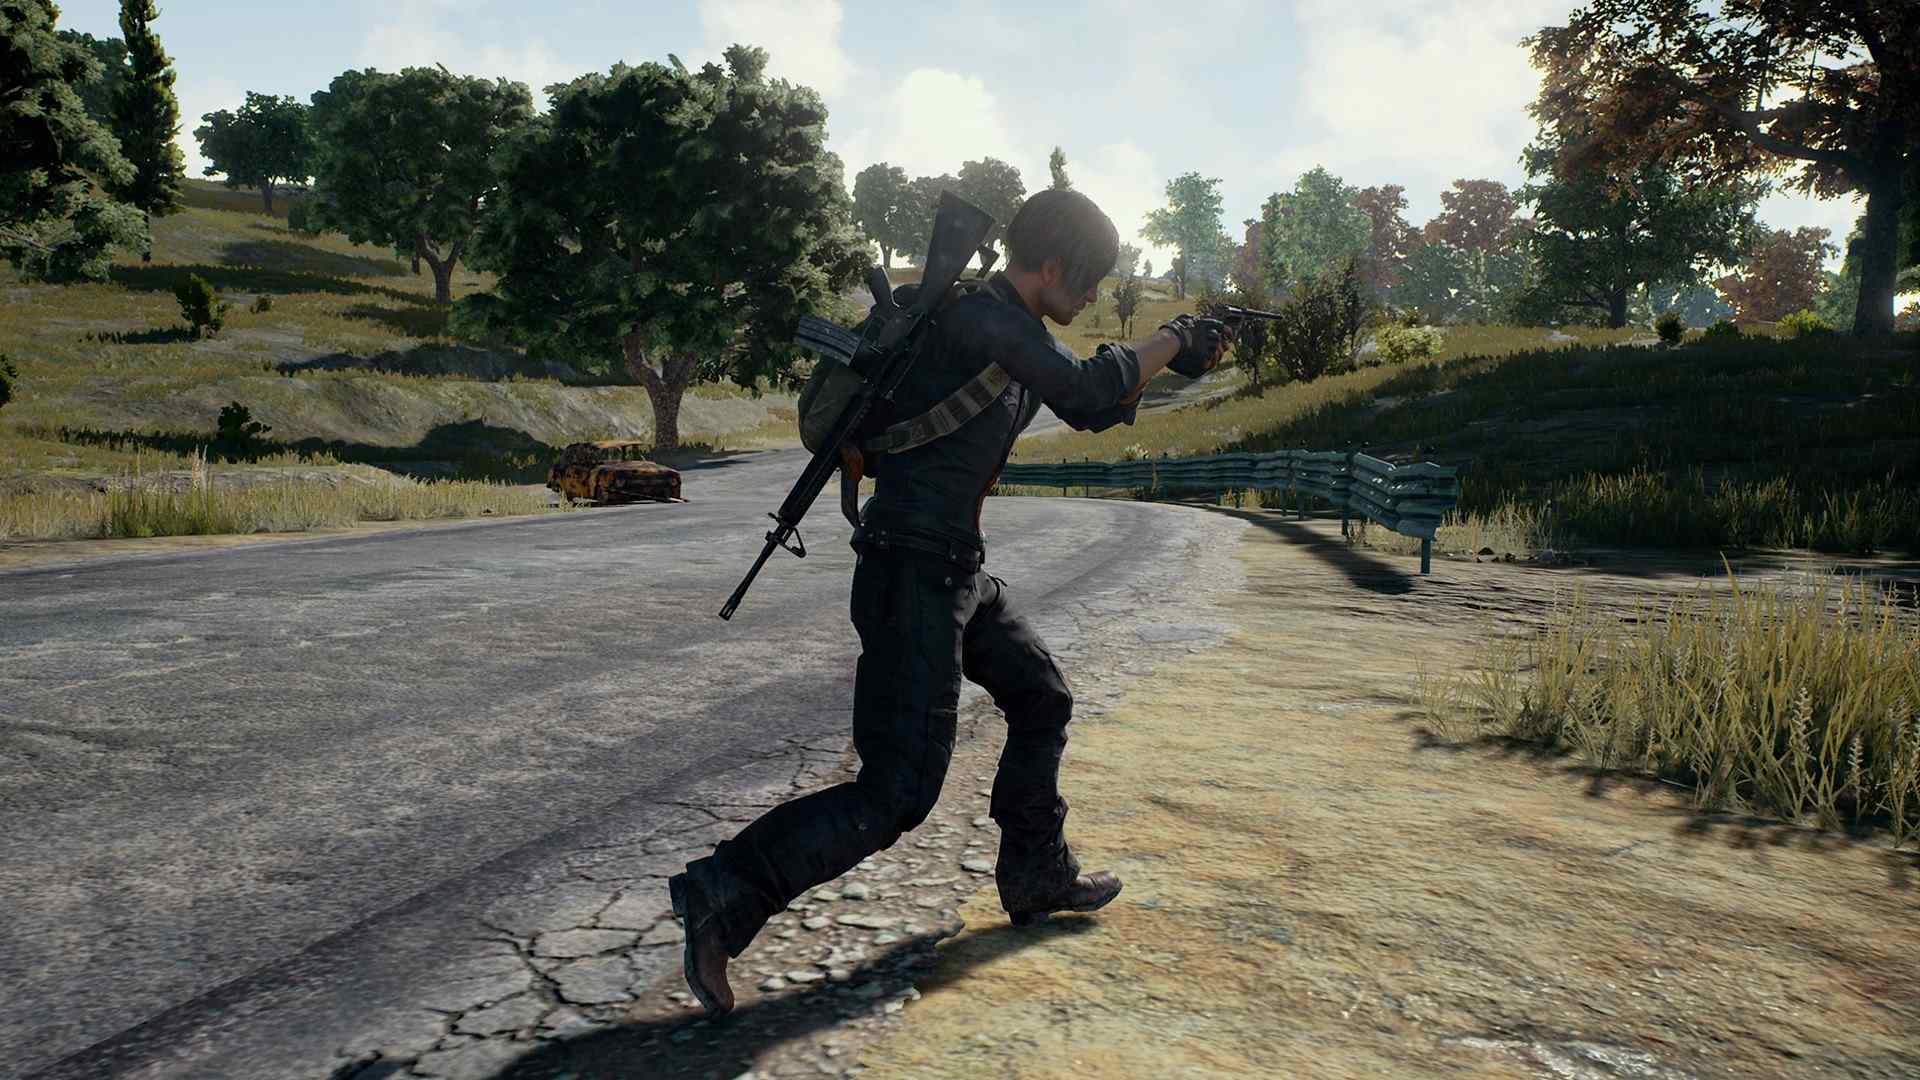 player unknown battlegrounds xbox one x tips - 100 images ... - 1920 x 1080 jpeg 199kB